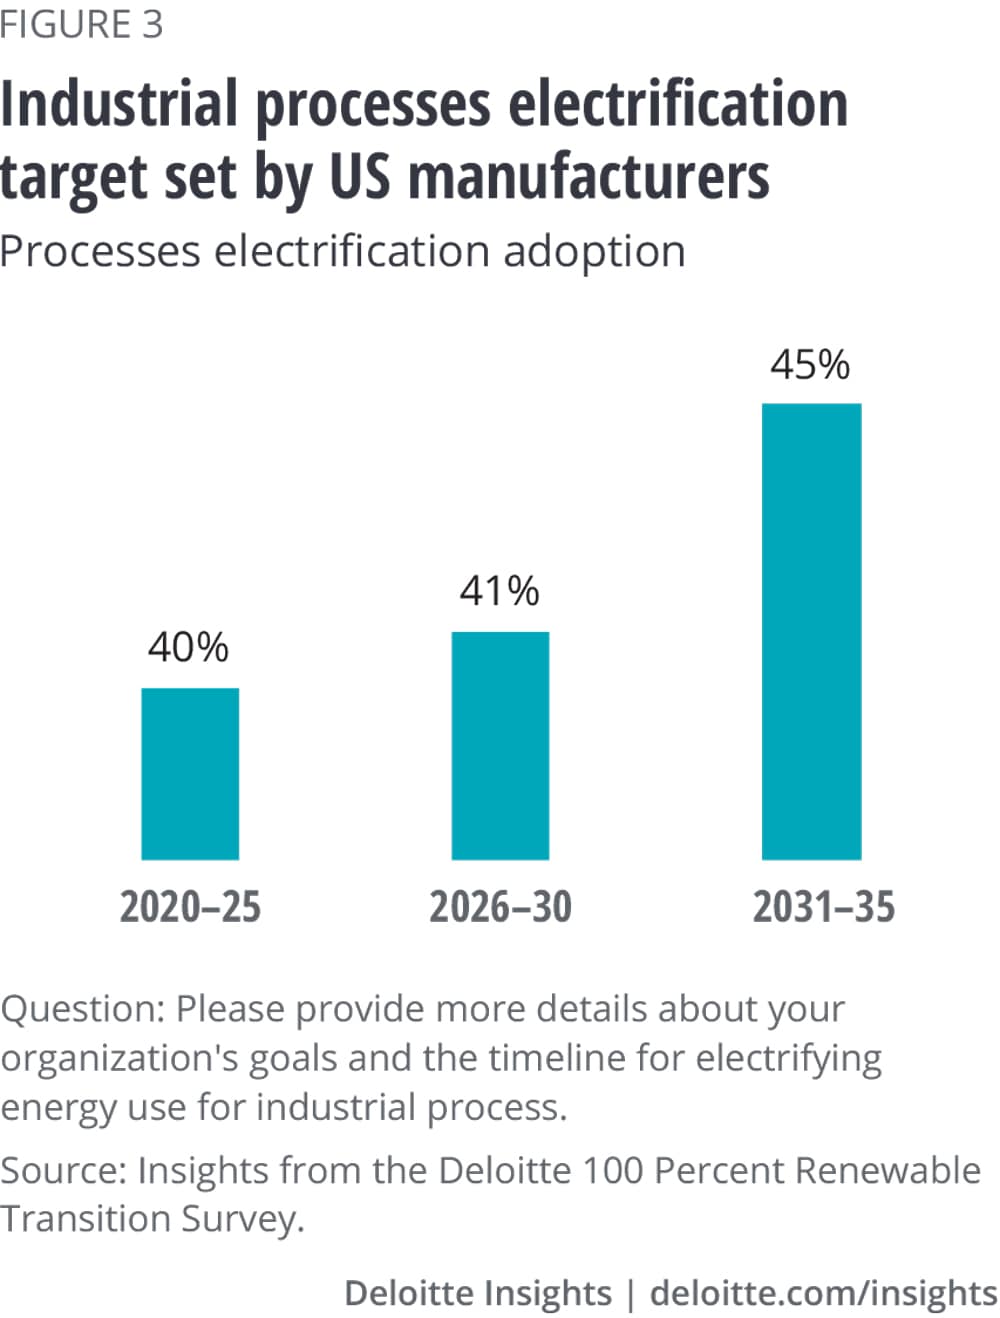 Industrial processes electrification target set by surveyed US manufacturers